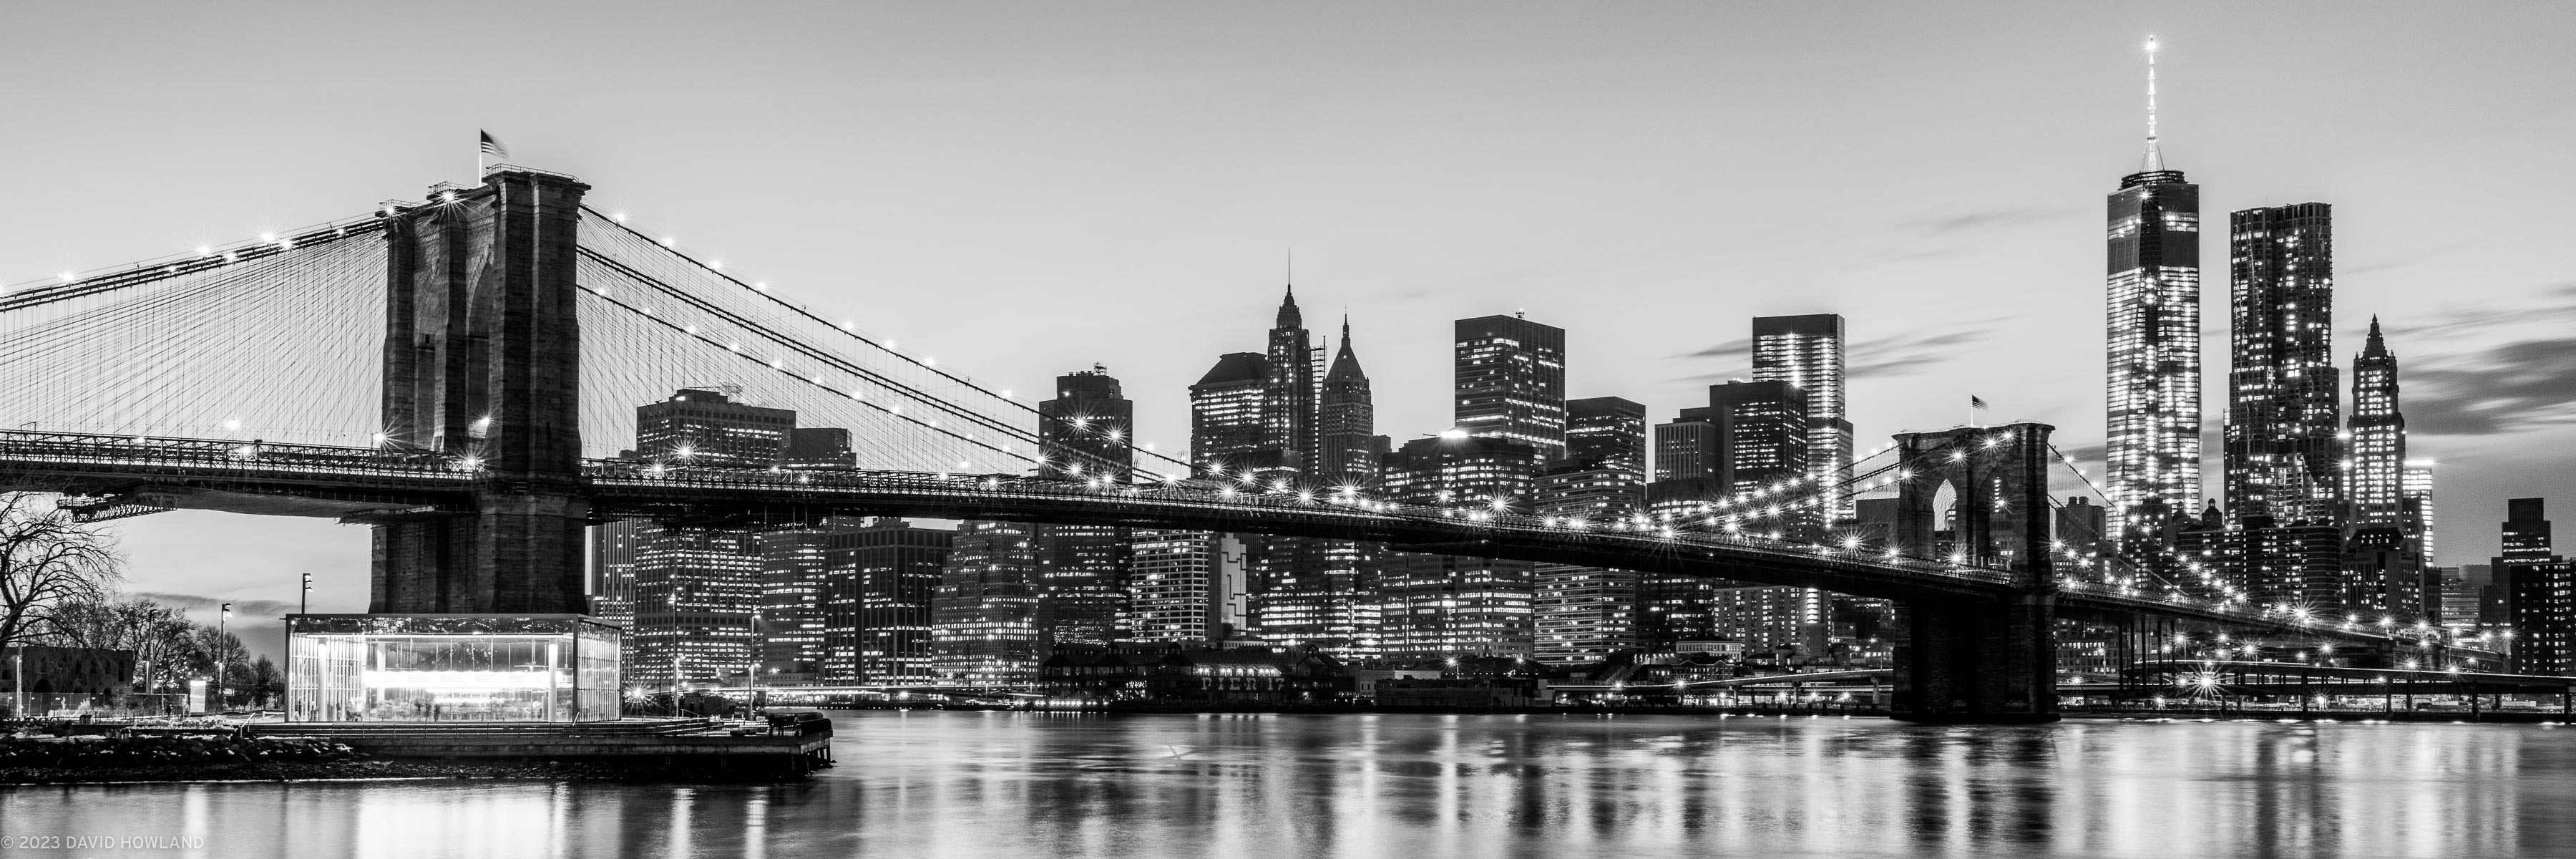 A black and white panorama photo of the Brooklyn Bridge in front of the illuminated skyscrapers of downtown New York City at night.